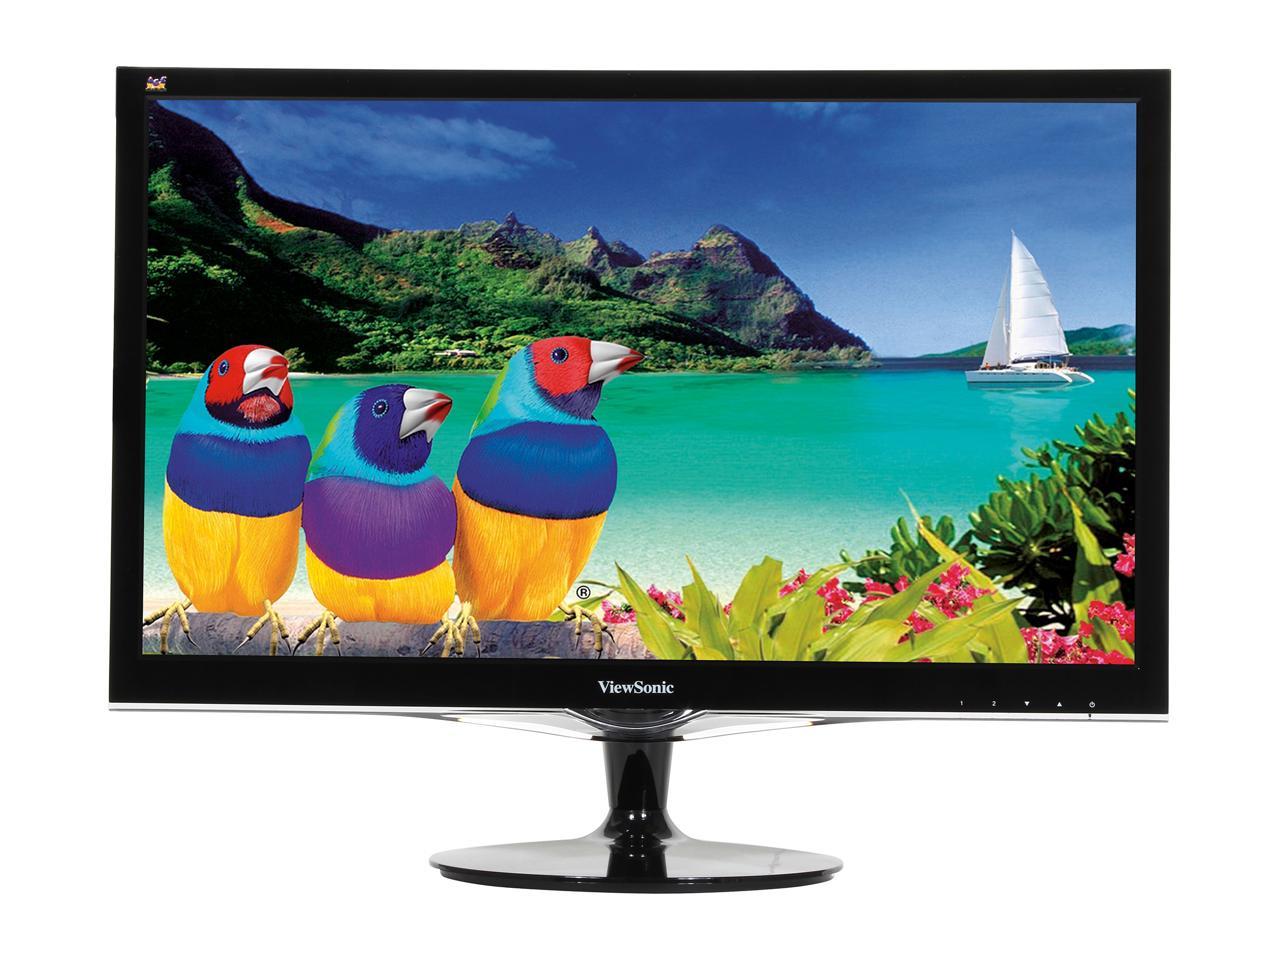 ViewSonic VX2452MH 24" (Actual size 23.6") Full HD 1920 x 1080 2ms (GTG) HDMI DVI-D VGA Built-in Speakers Anti-Glare LED Backlit LCD Gaming Monitor